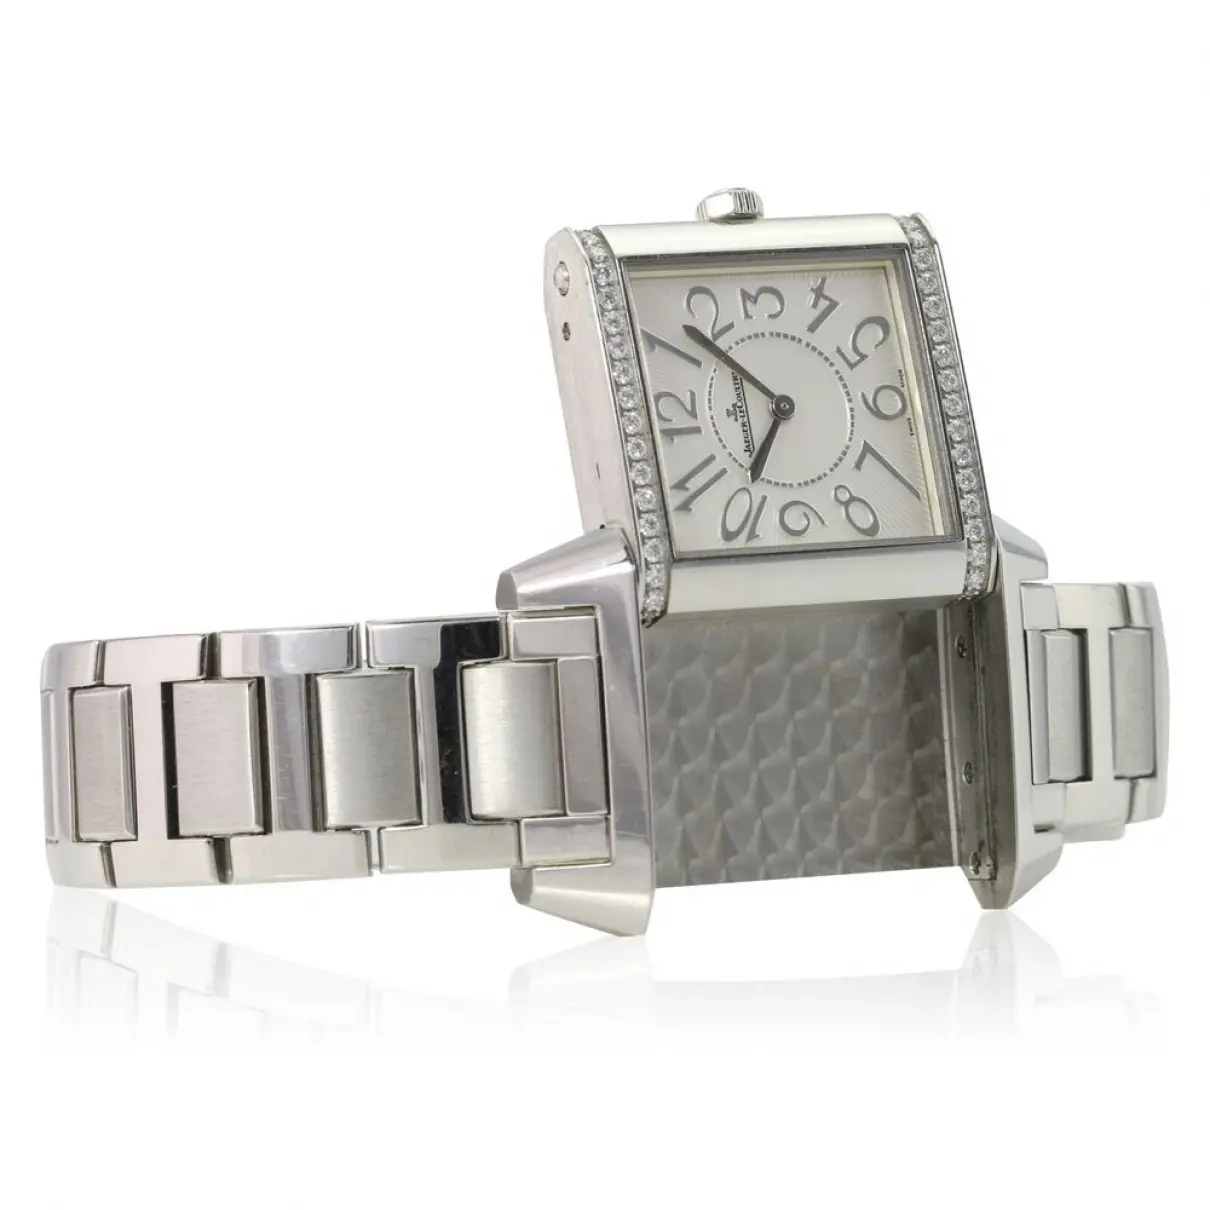 Buy Jaeger-Lecoultre Silver watch online